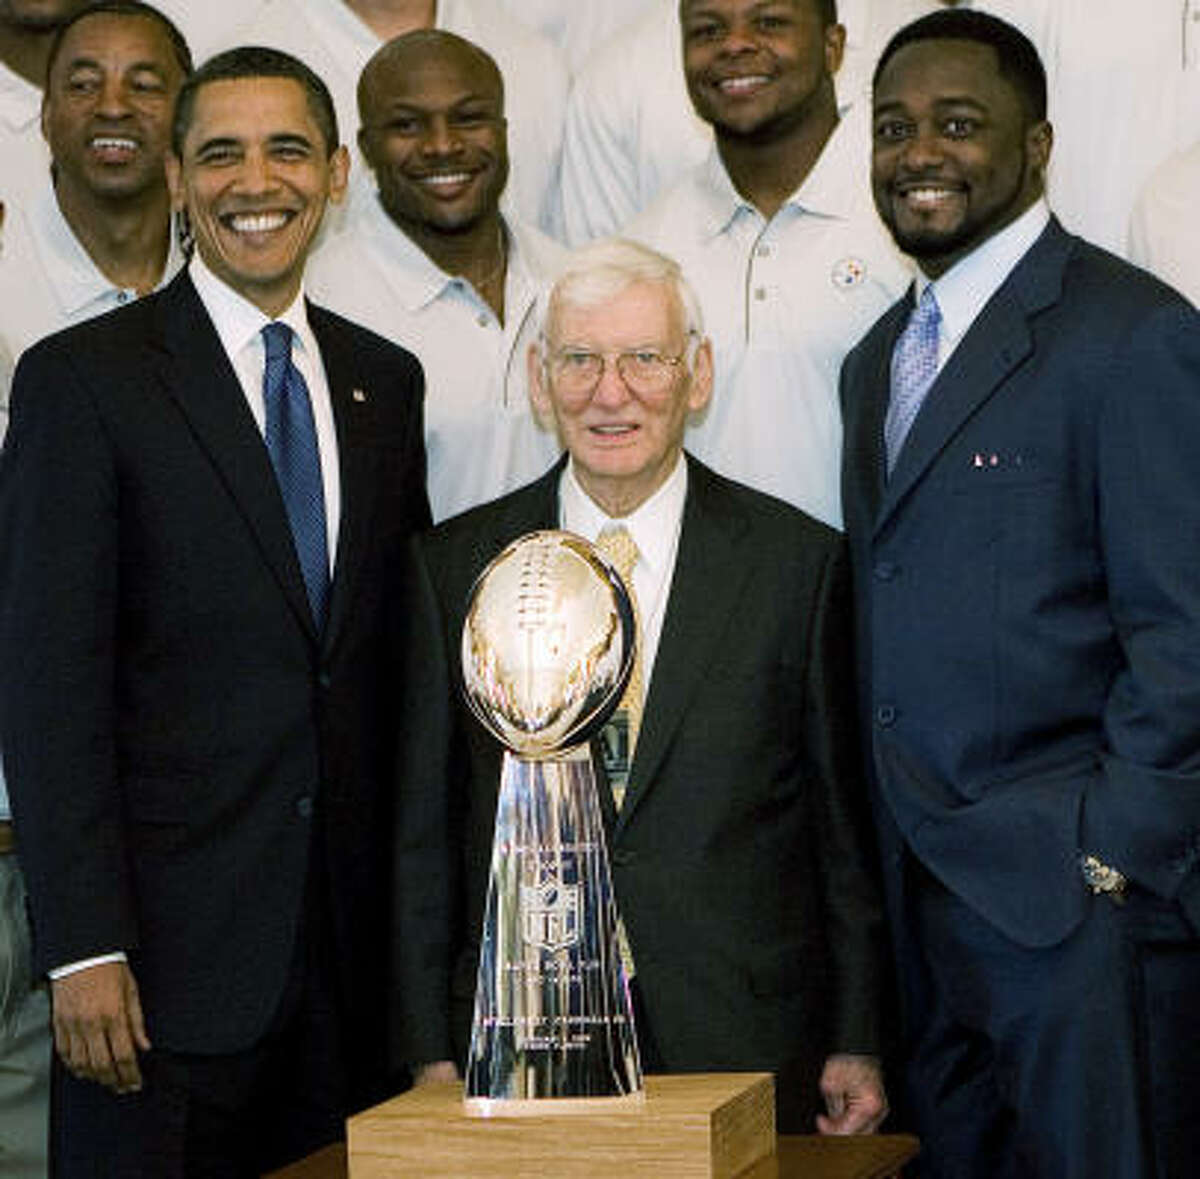 President Barack Obama poses with Pittsburgh Steelers Chairman Dan Rooney and head coach Mike Tomlin in the East Room.